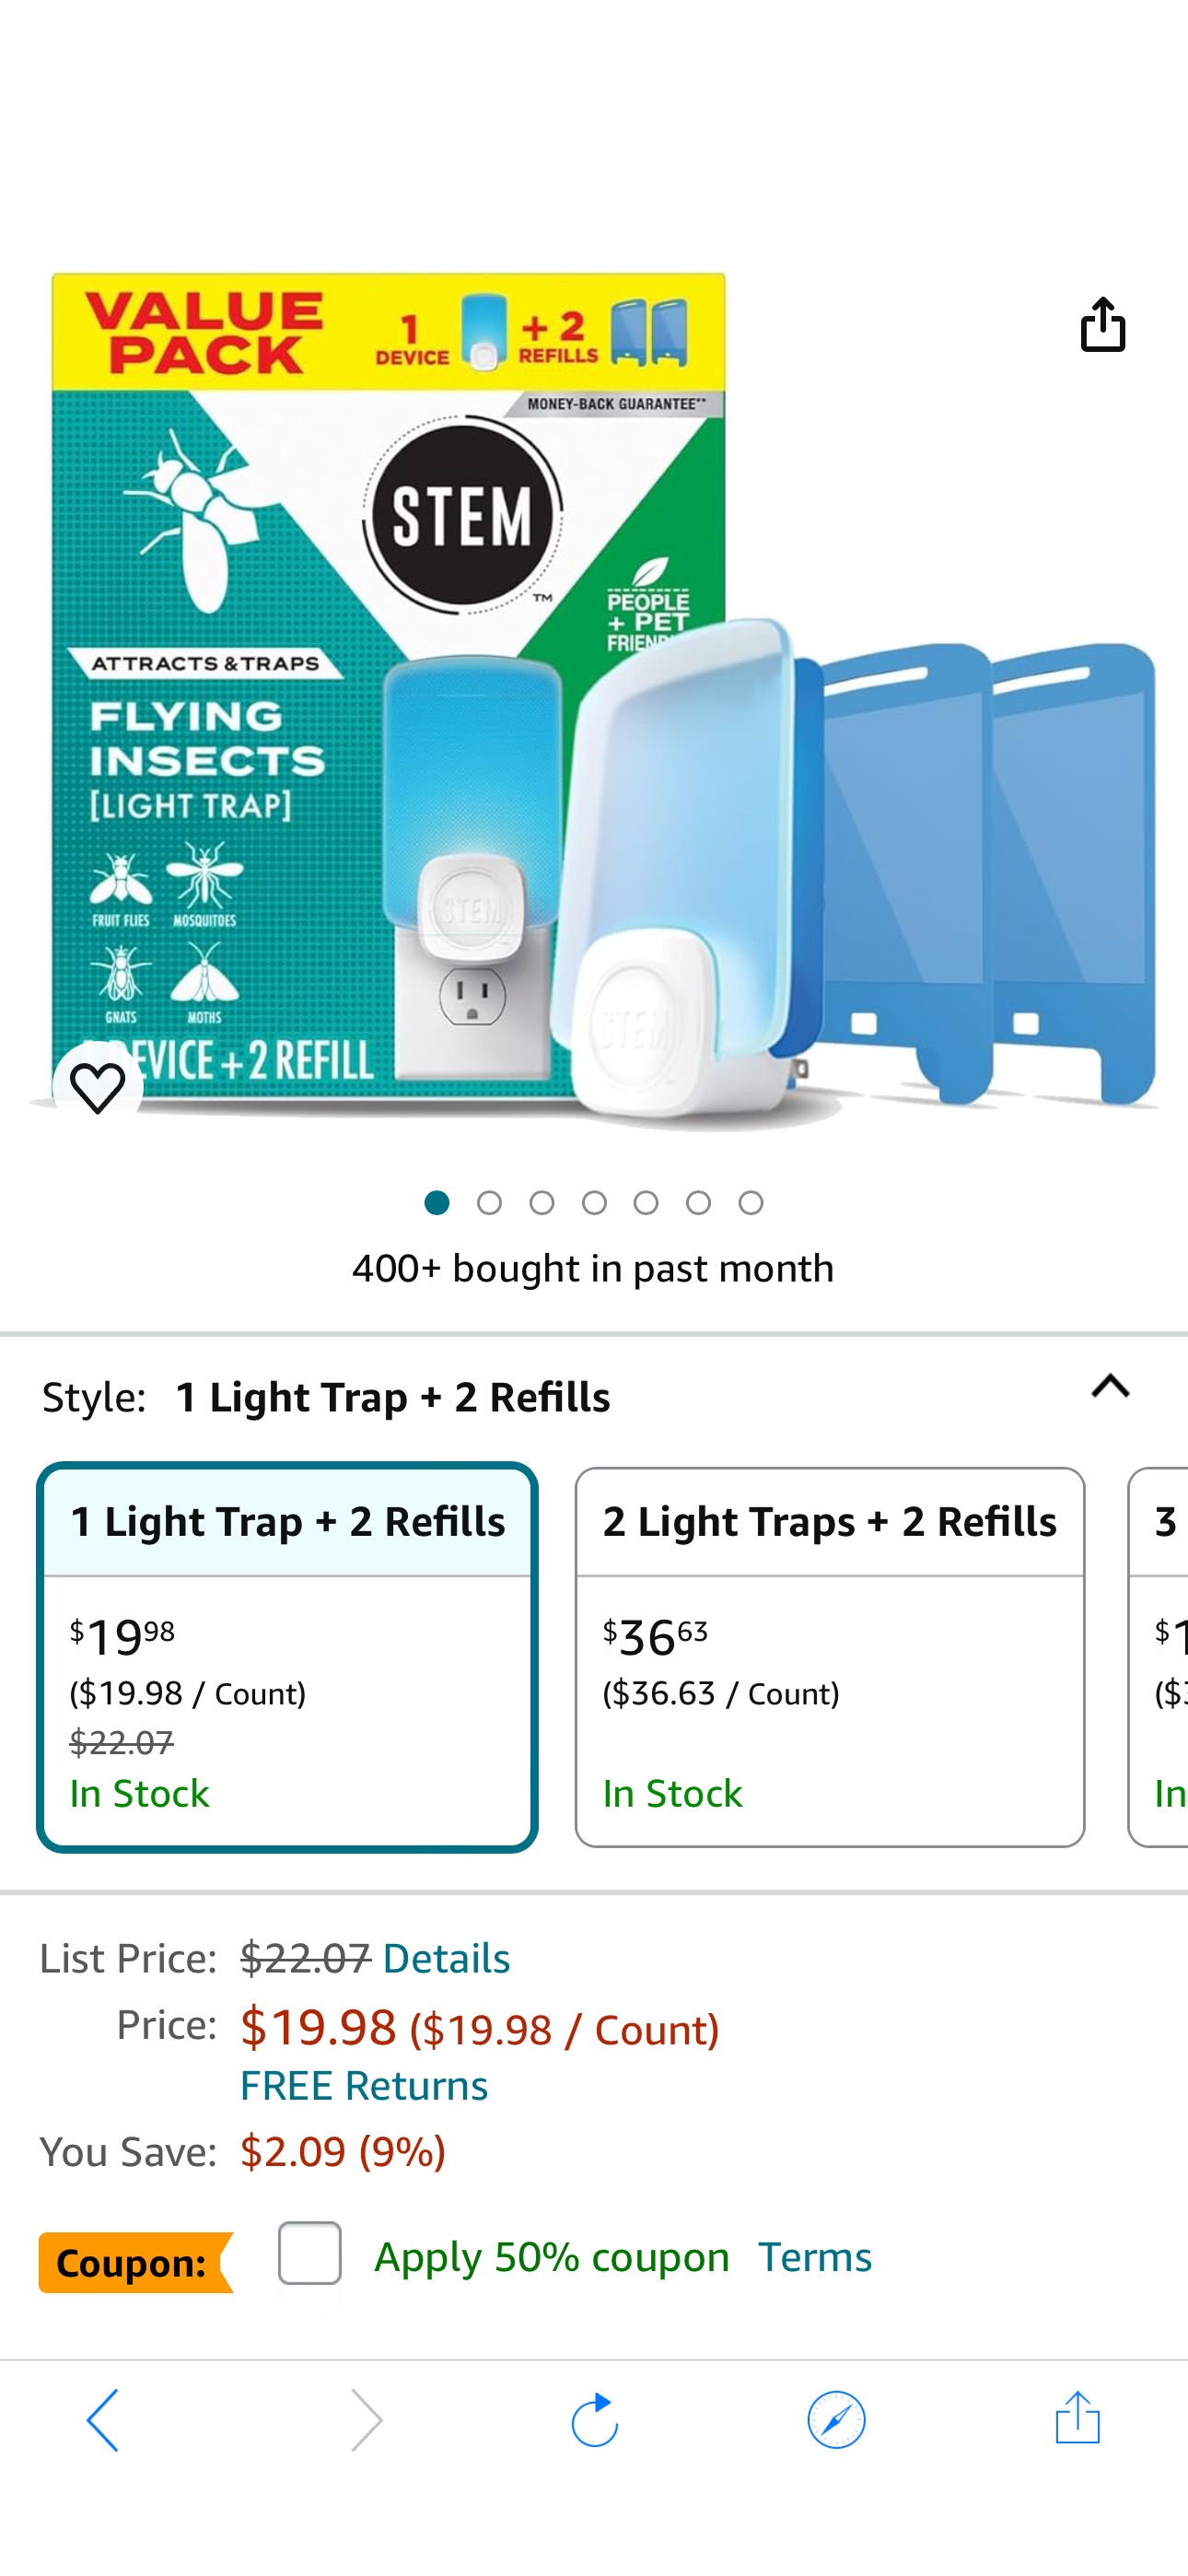 Amazon.com: STEM Light Trap, Attracts and Traps Flying Insects, Emits Soft Blue Light, Starter Kit with 1 Light Trap and 2 Refills : Patio, Lawn & Garden额外50%off